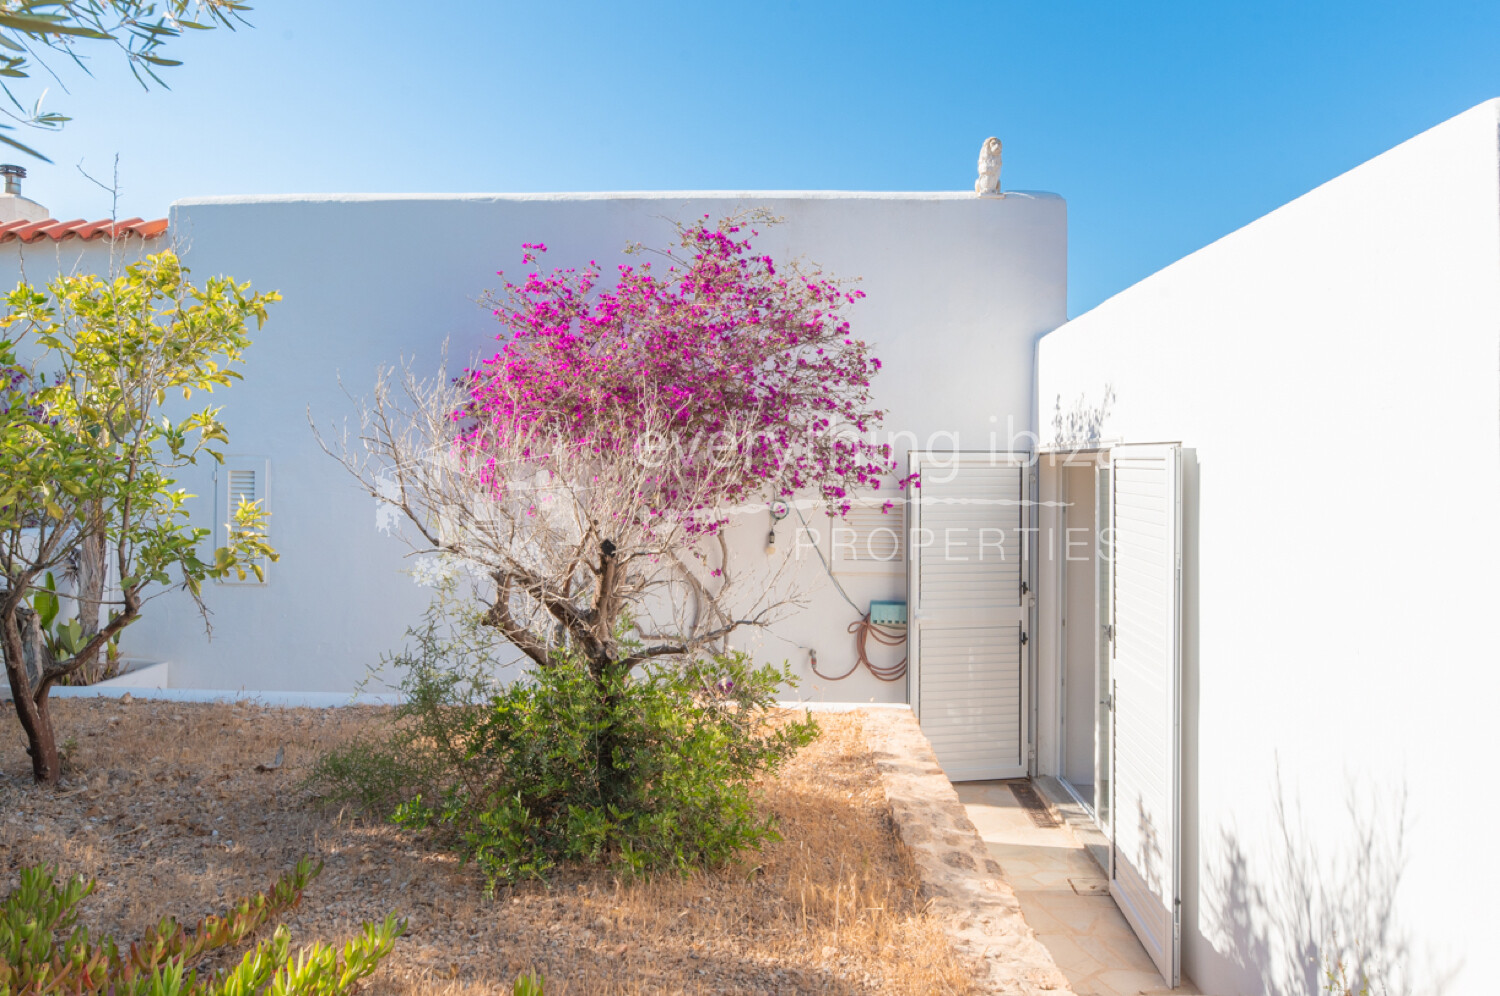 Modern Sea View Semi Detached House with Private Pool in Picturesque Cala Vadella, ref. 1687, for sale in Ibiza by everything ibiza Properties